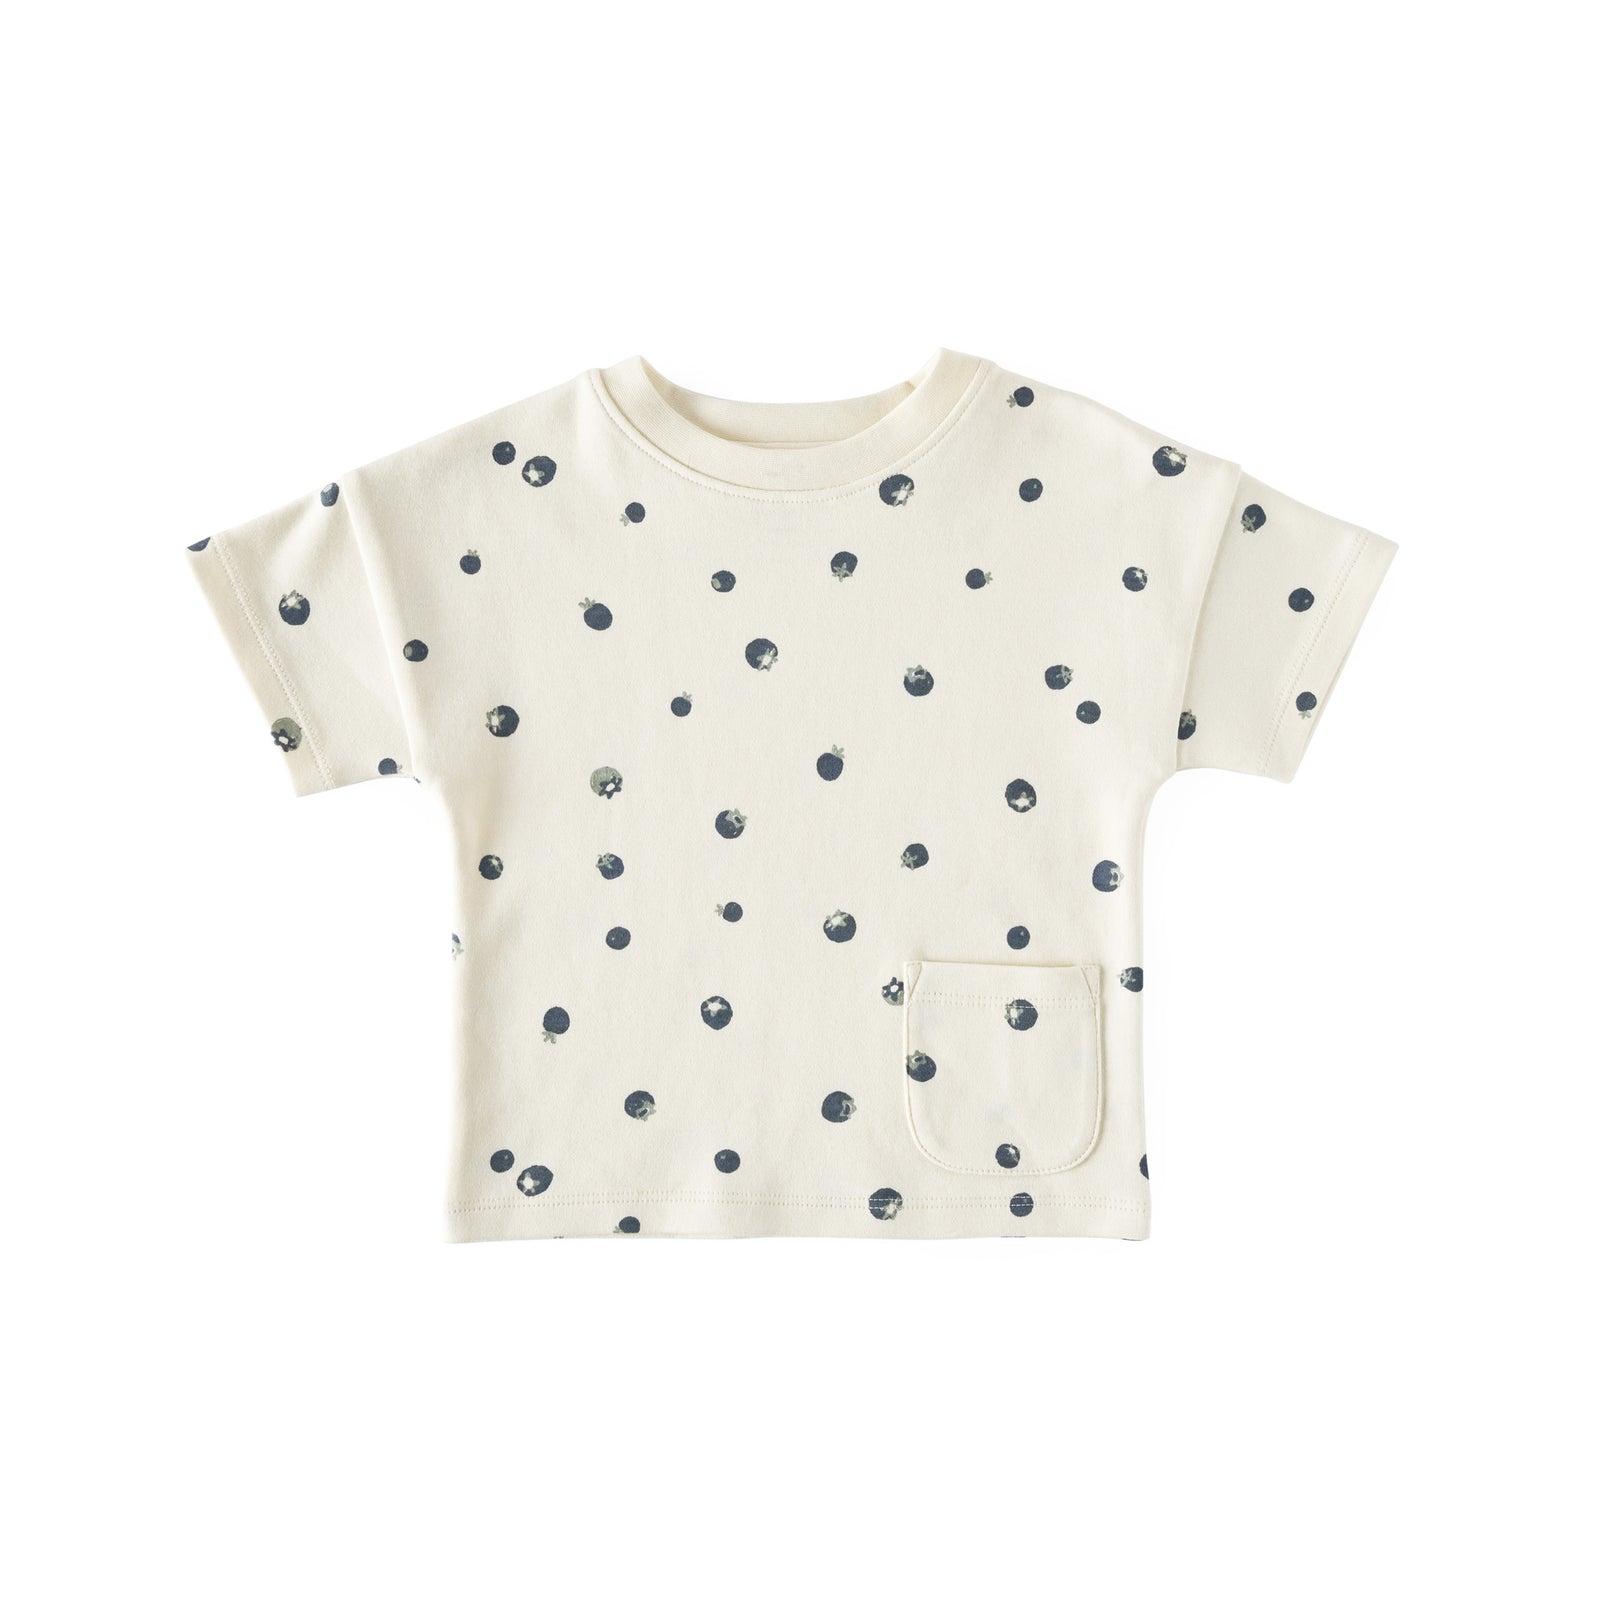 Pocket Dropped Shoulder T-Shirt T-Shirt Pehr Canada Wild Blueberry 18 - 24 mos. 